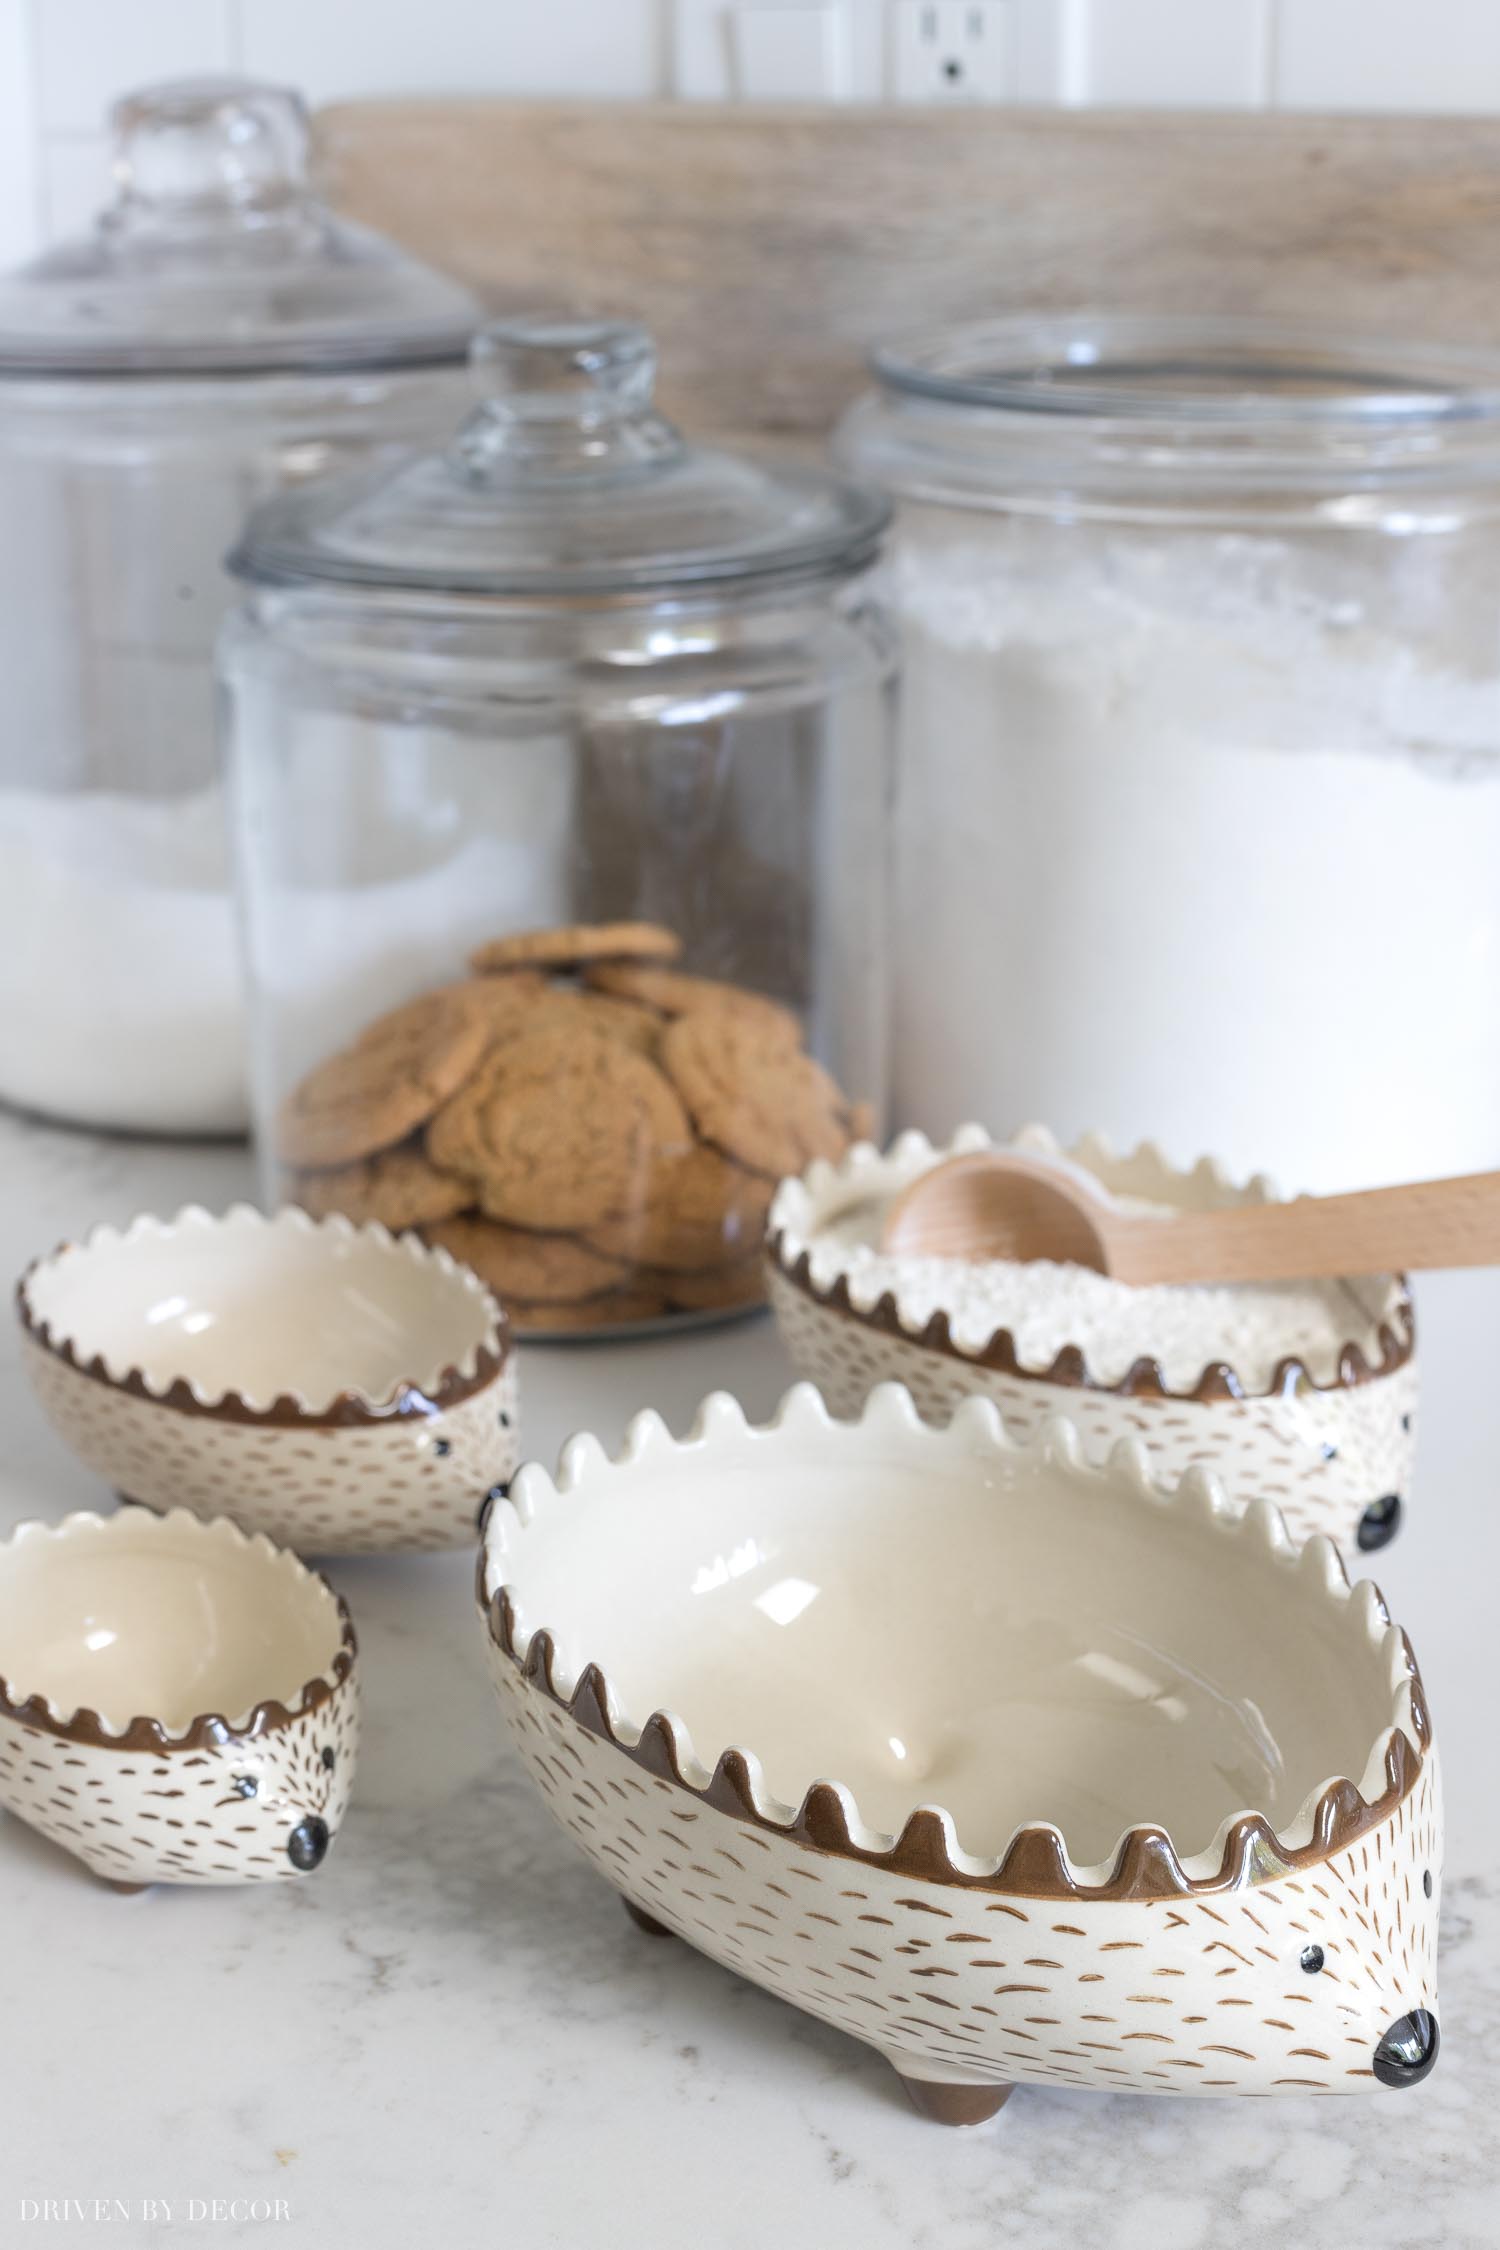 These measuring cups couldn't be any cuter! And they nest within each other for easy storage!